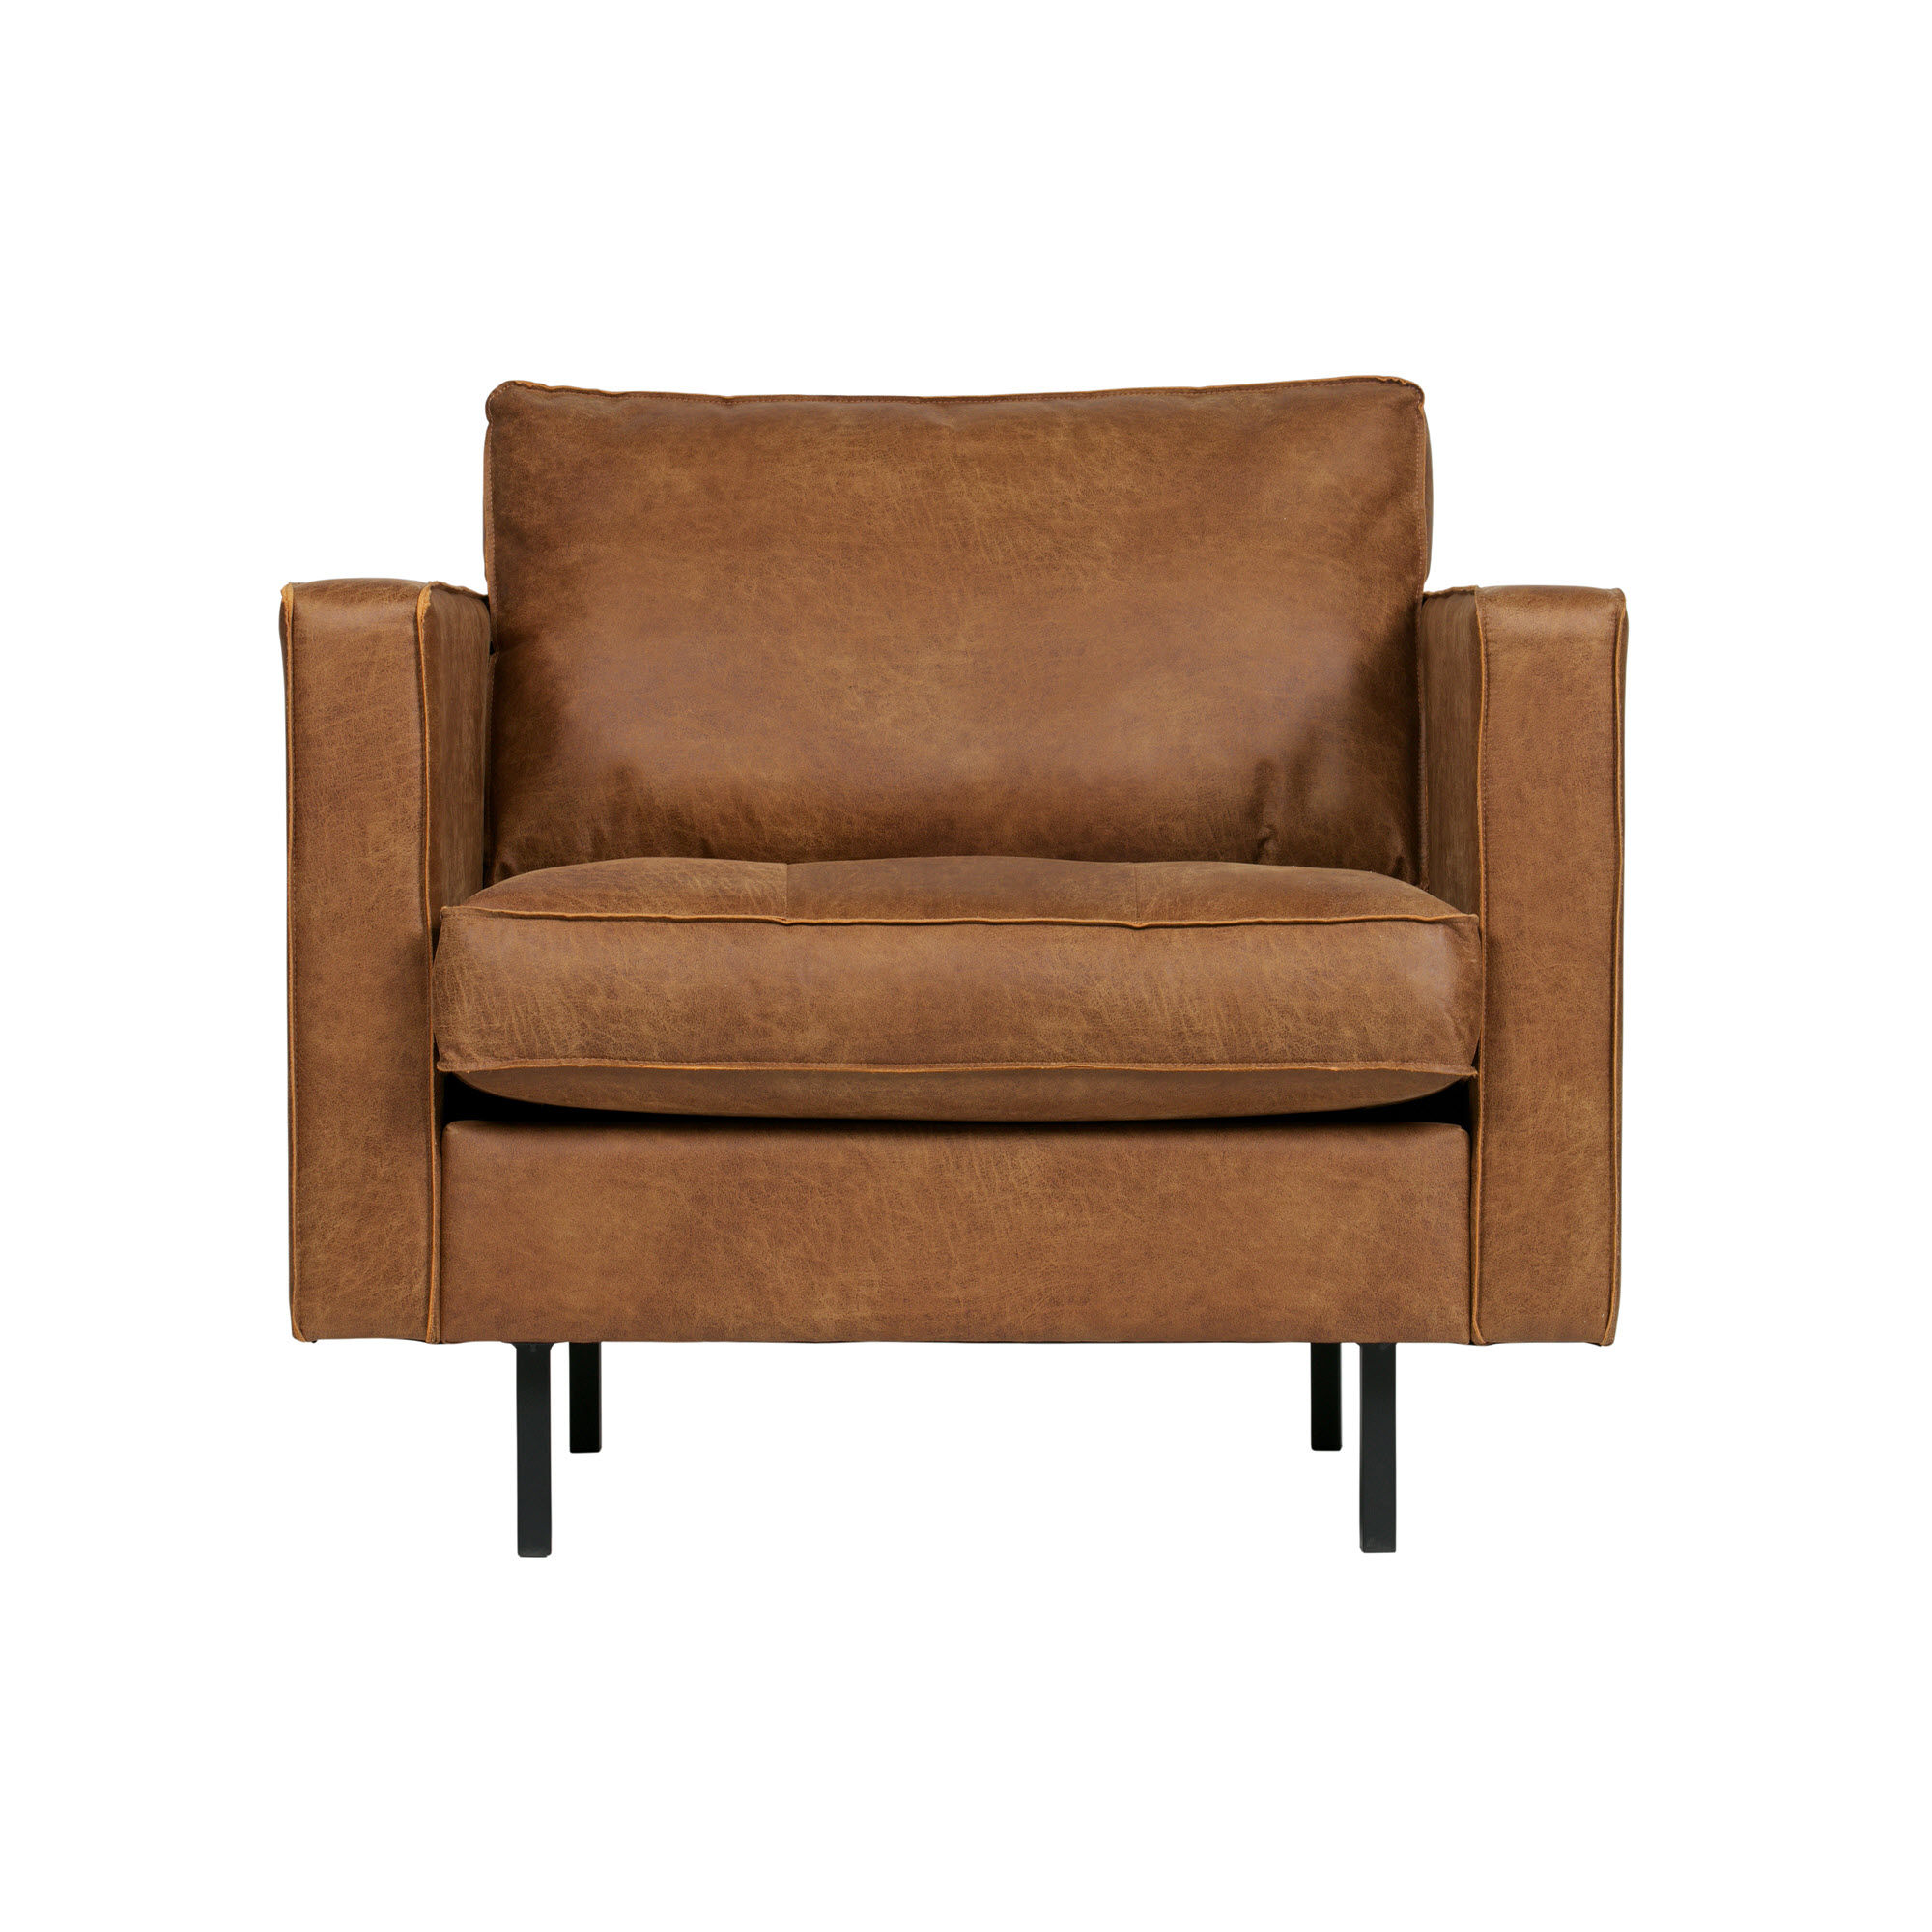 Rodeo classic Fauteuil – Recycle leer